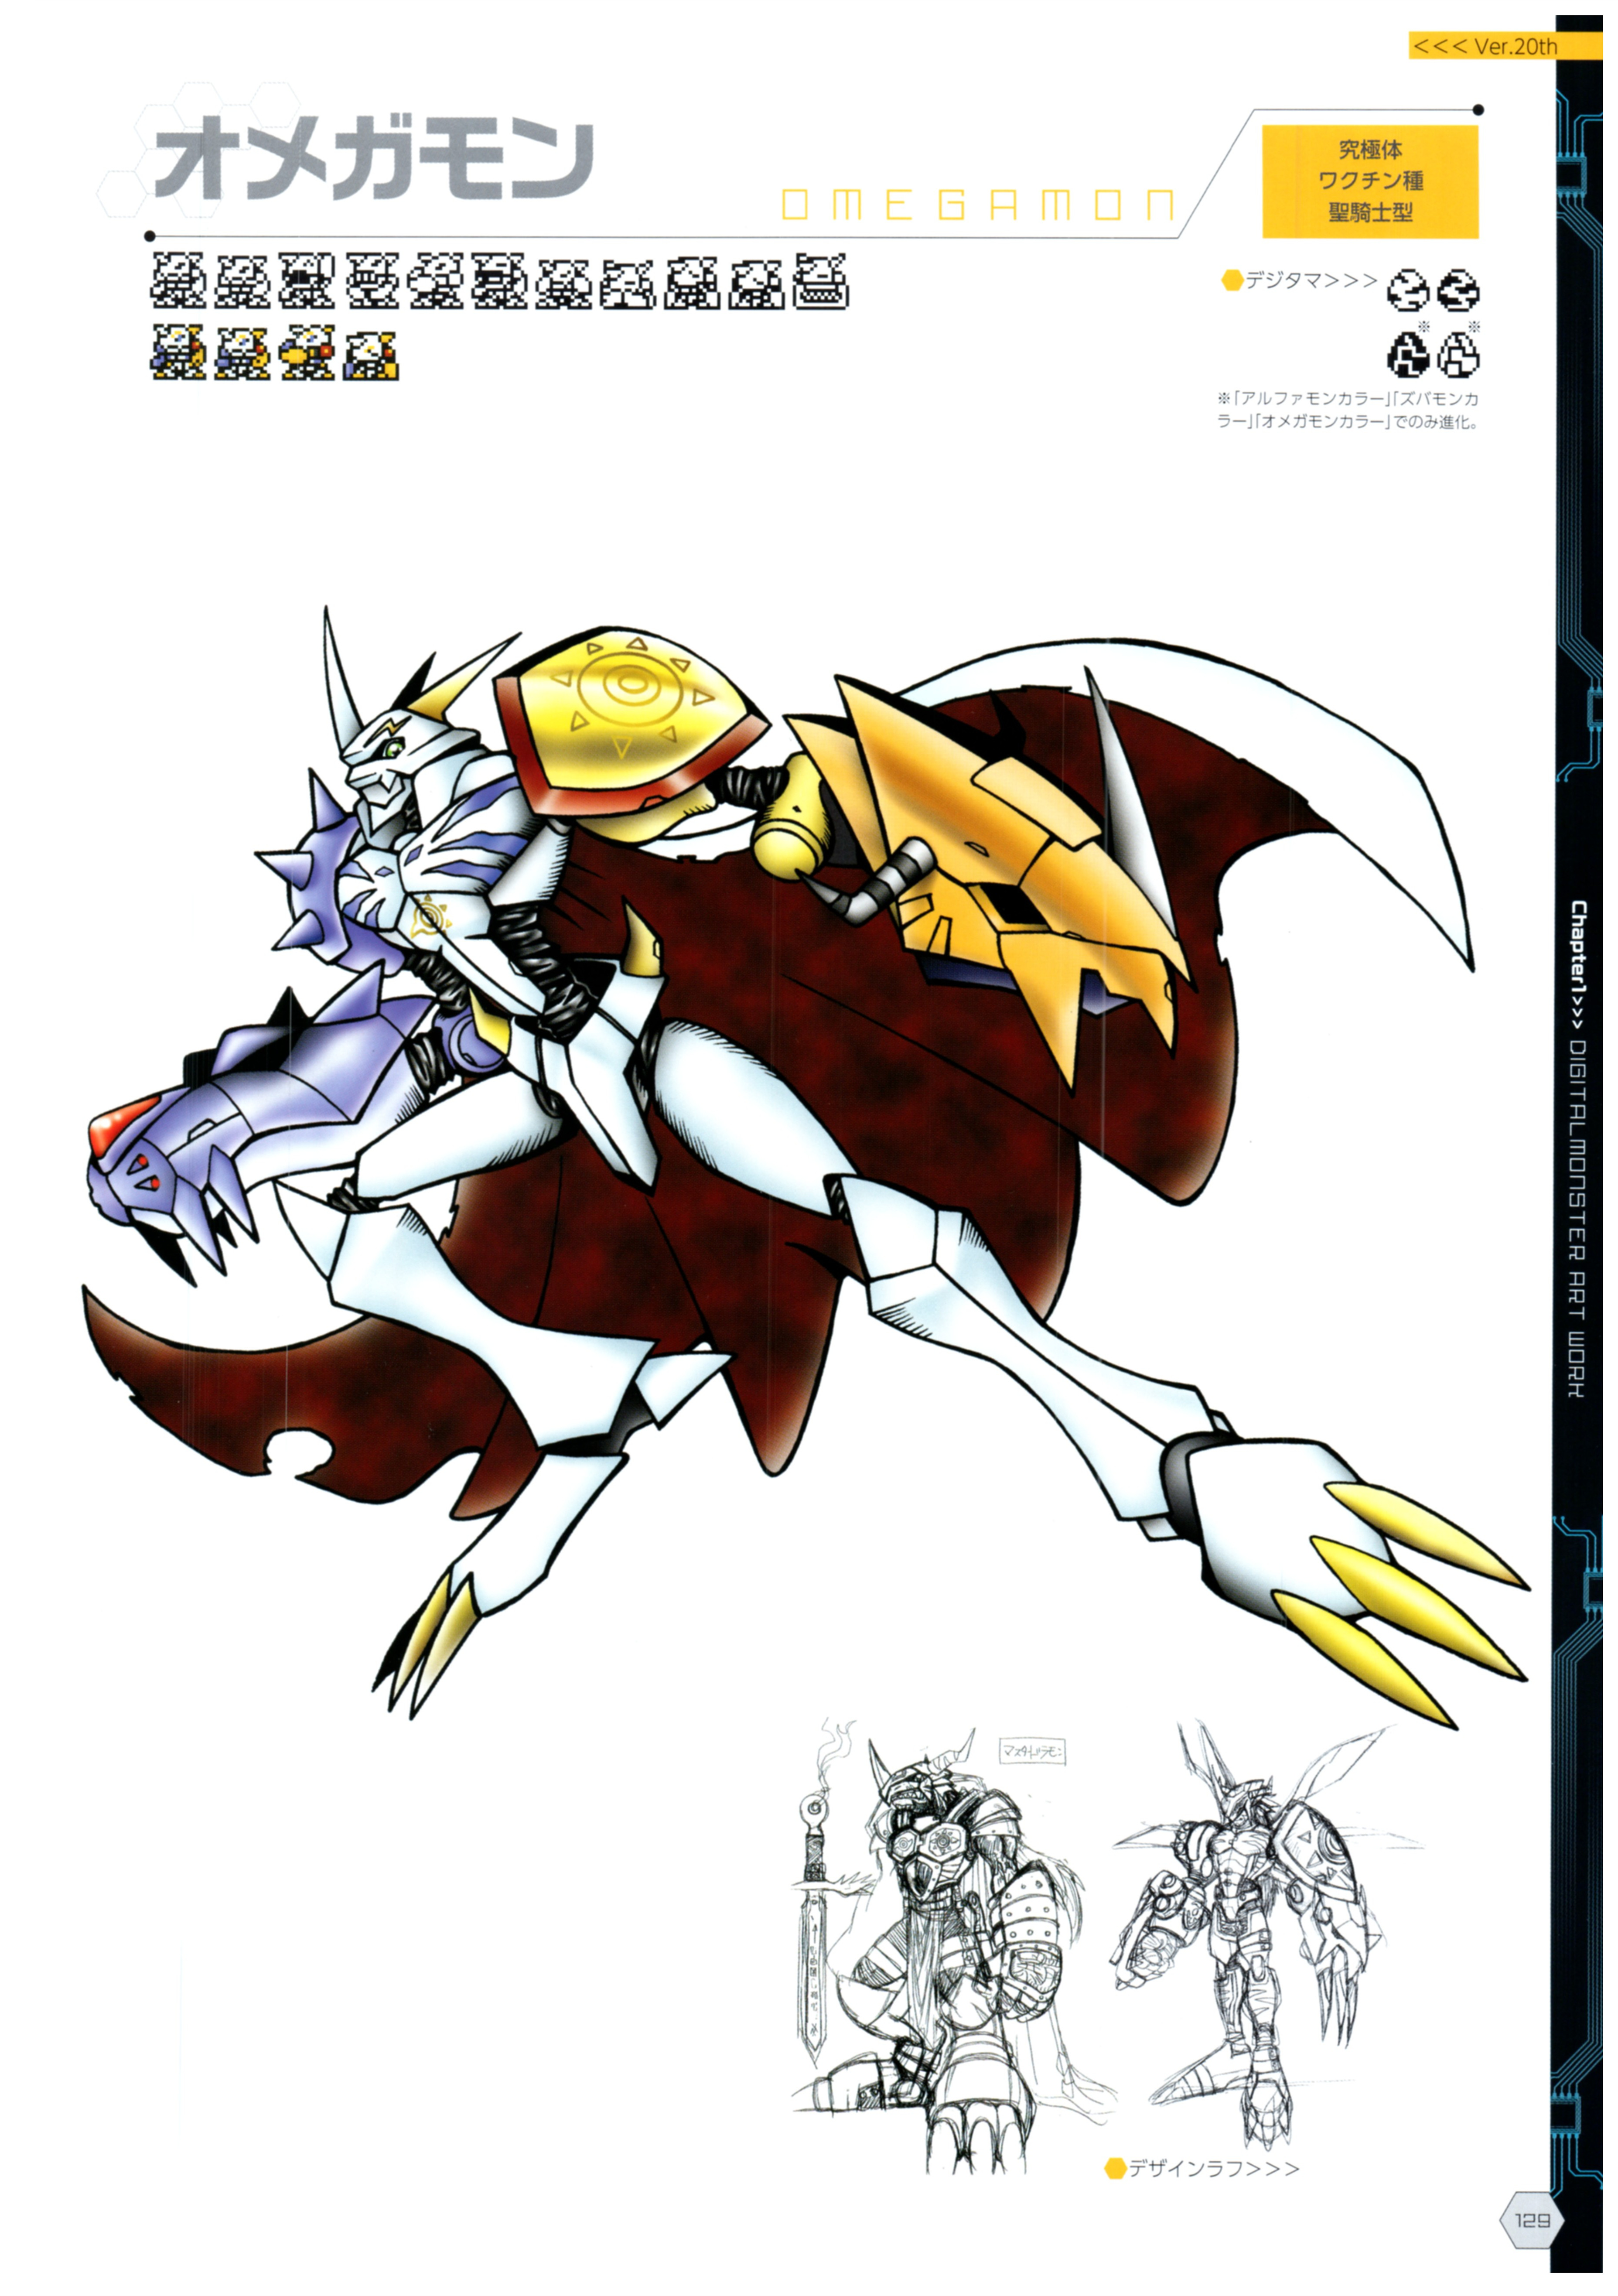 IWIW: Digimon, Digital Monsters! Review, Page 75